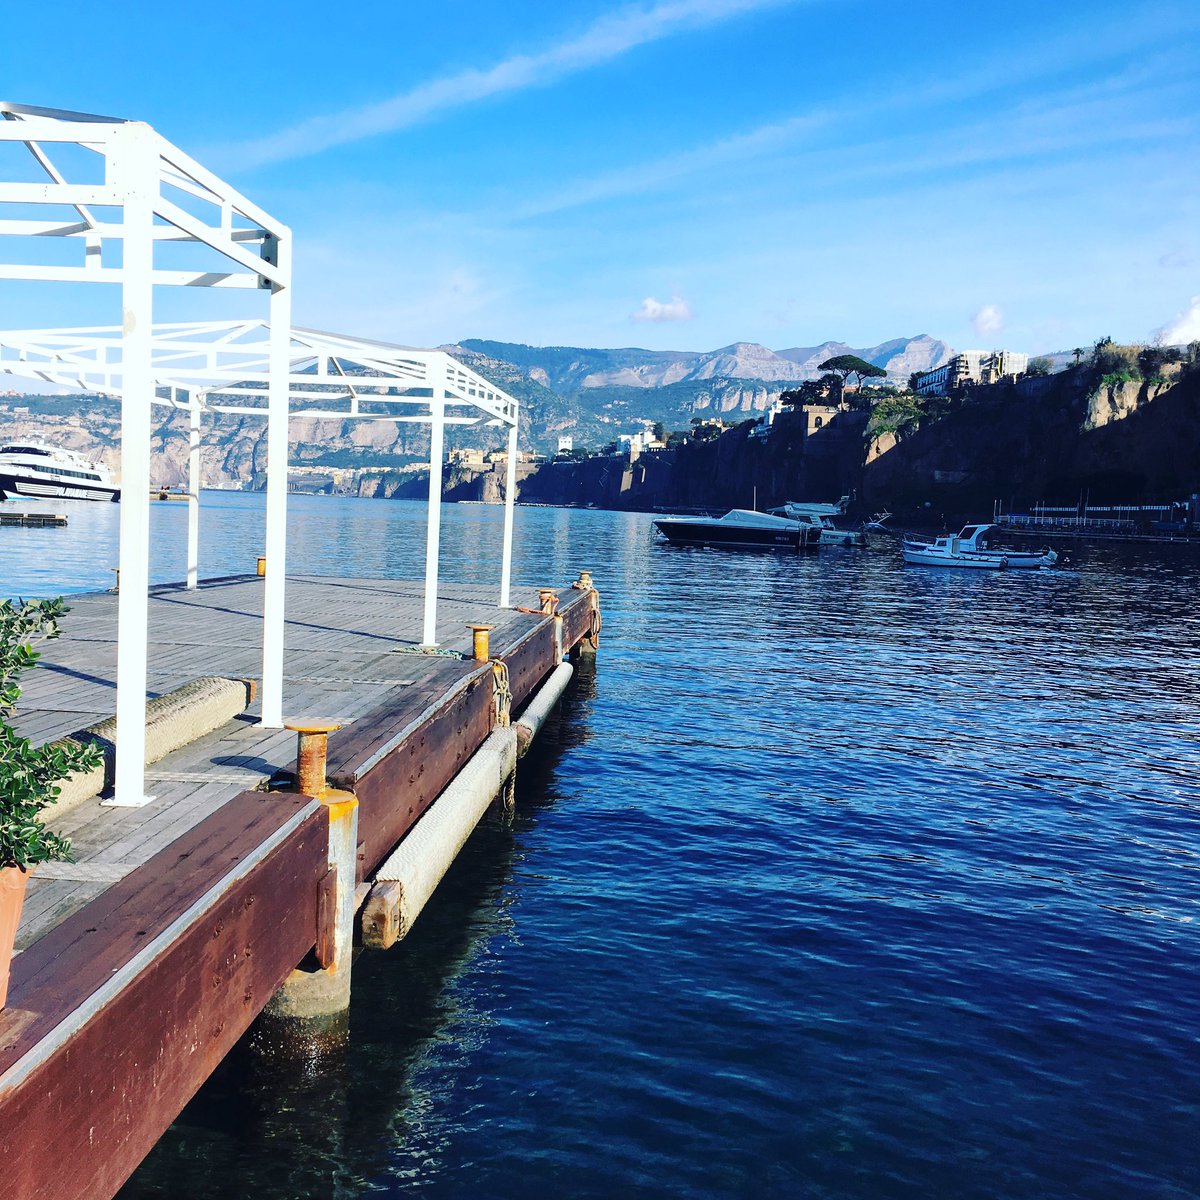 Ahhh #sorrentoitaly our are so pretty. I have been enticed to catch the ferry back to #Naples #travelblogging #italy #slowtraveling #jillanddougtravel ##iloveferries #amalficoast #mediterraneansea